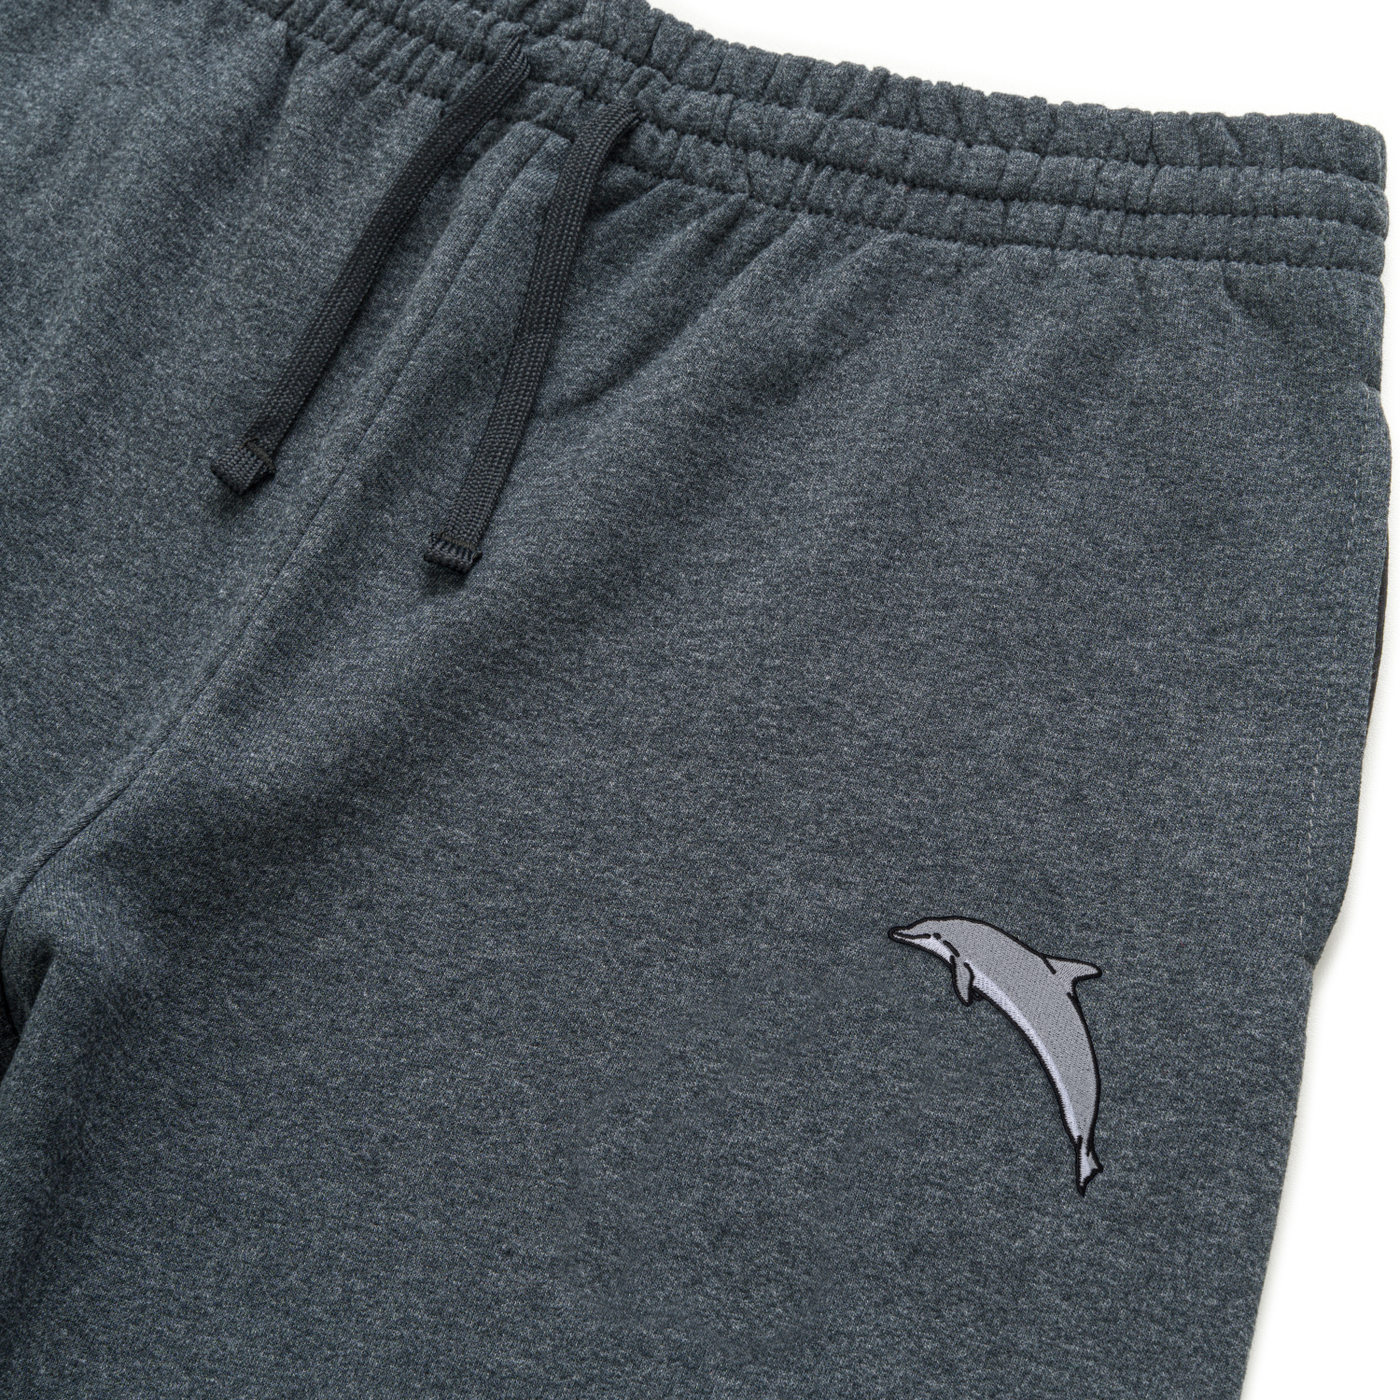 Bobby's Planet Unisex Embroidered Dolphin Joggers from Seven Seas Fish Animals Collection in Black Heather Color#color_black-heather